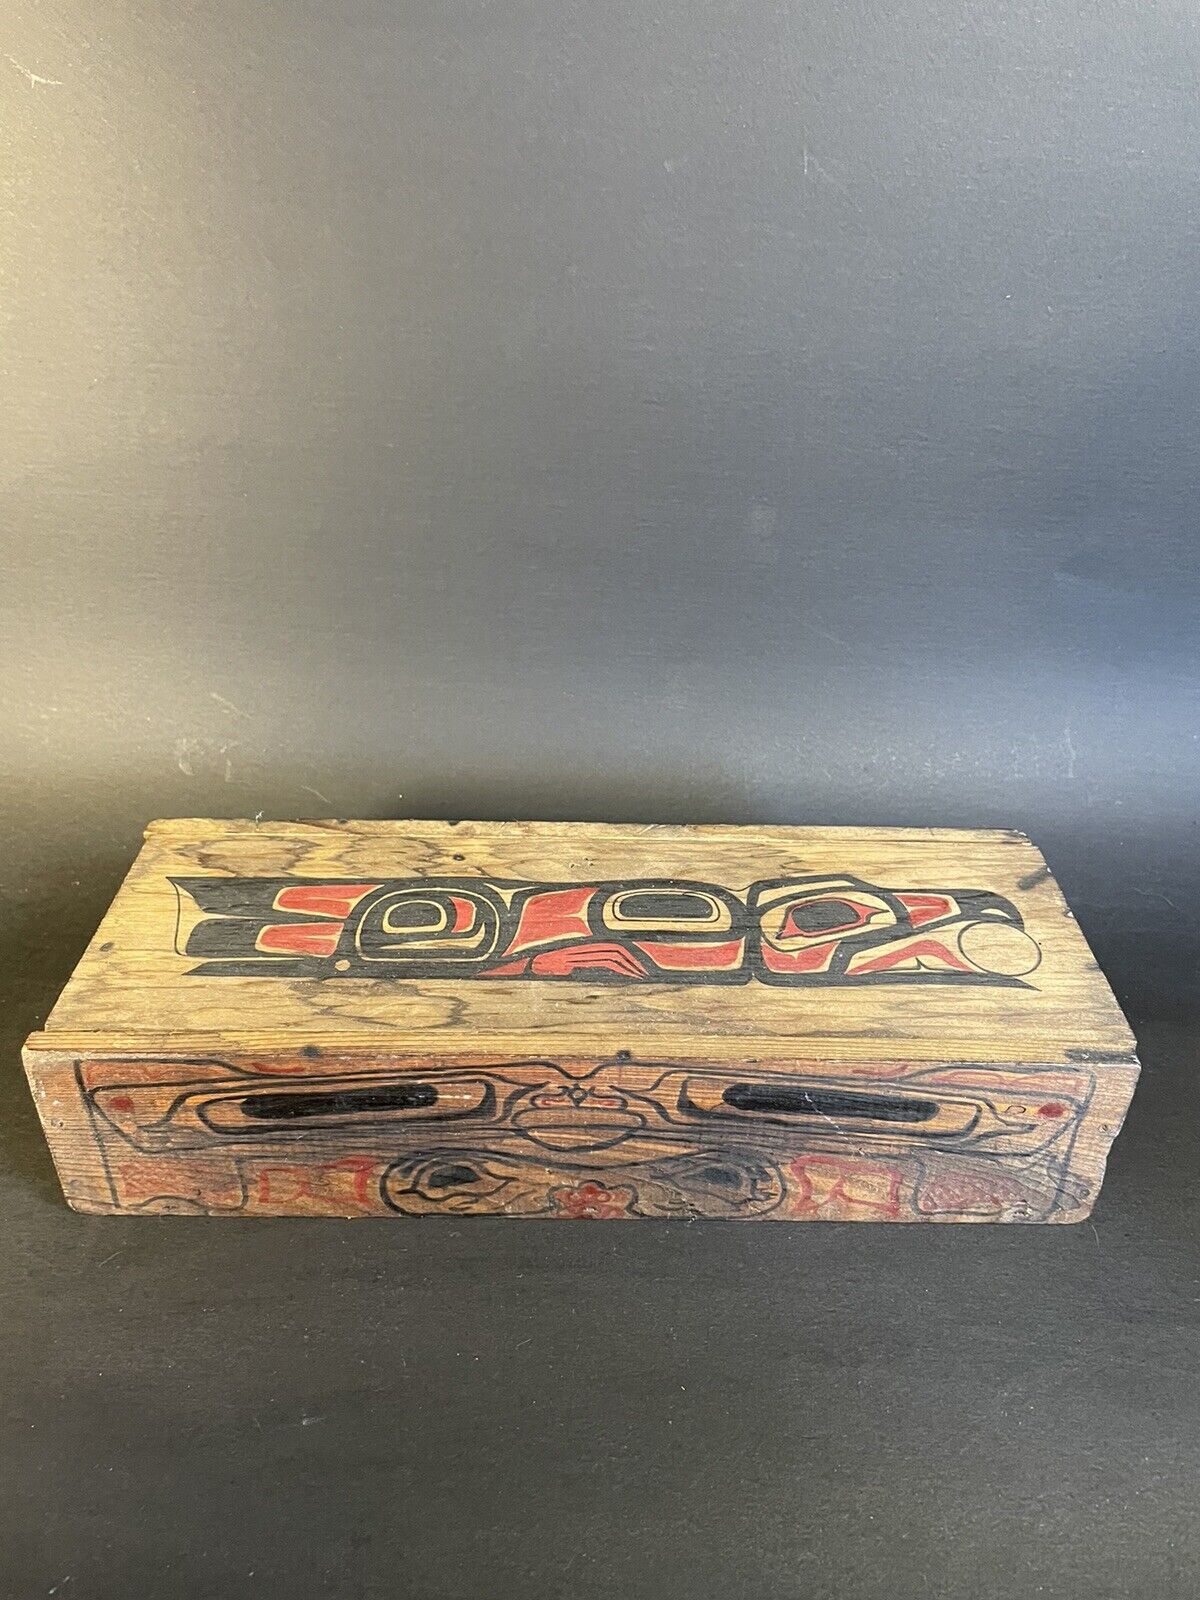 Pacific Northwest Coast Native American Wood Box Water stains 9.75”